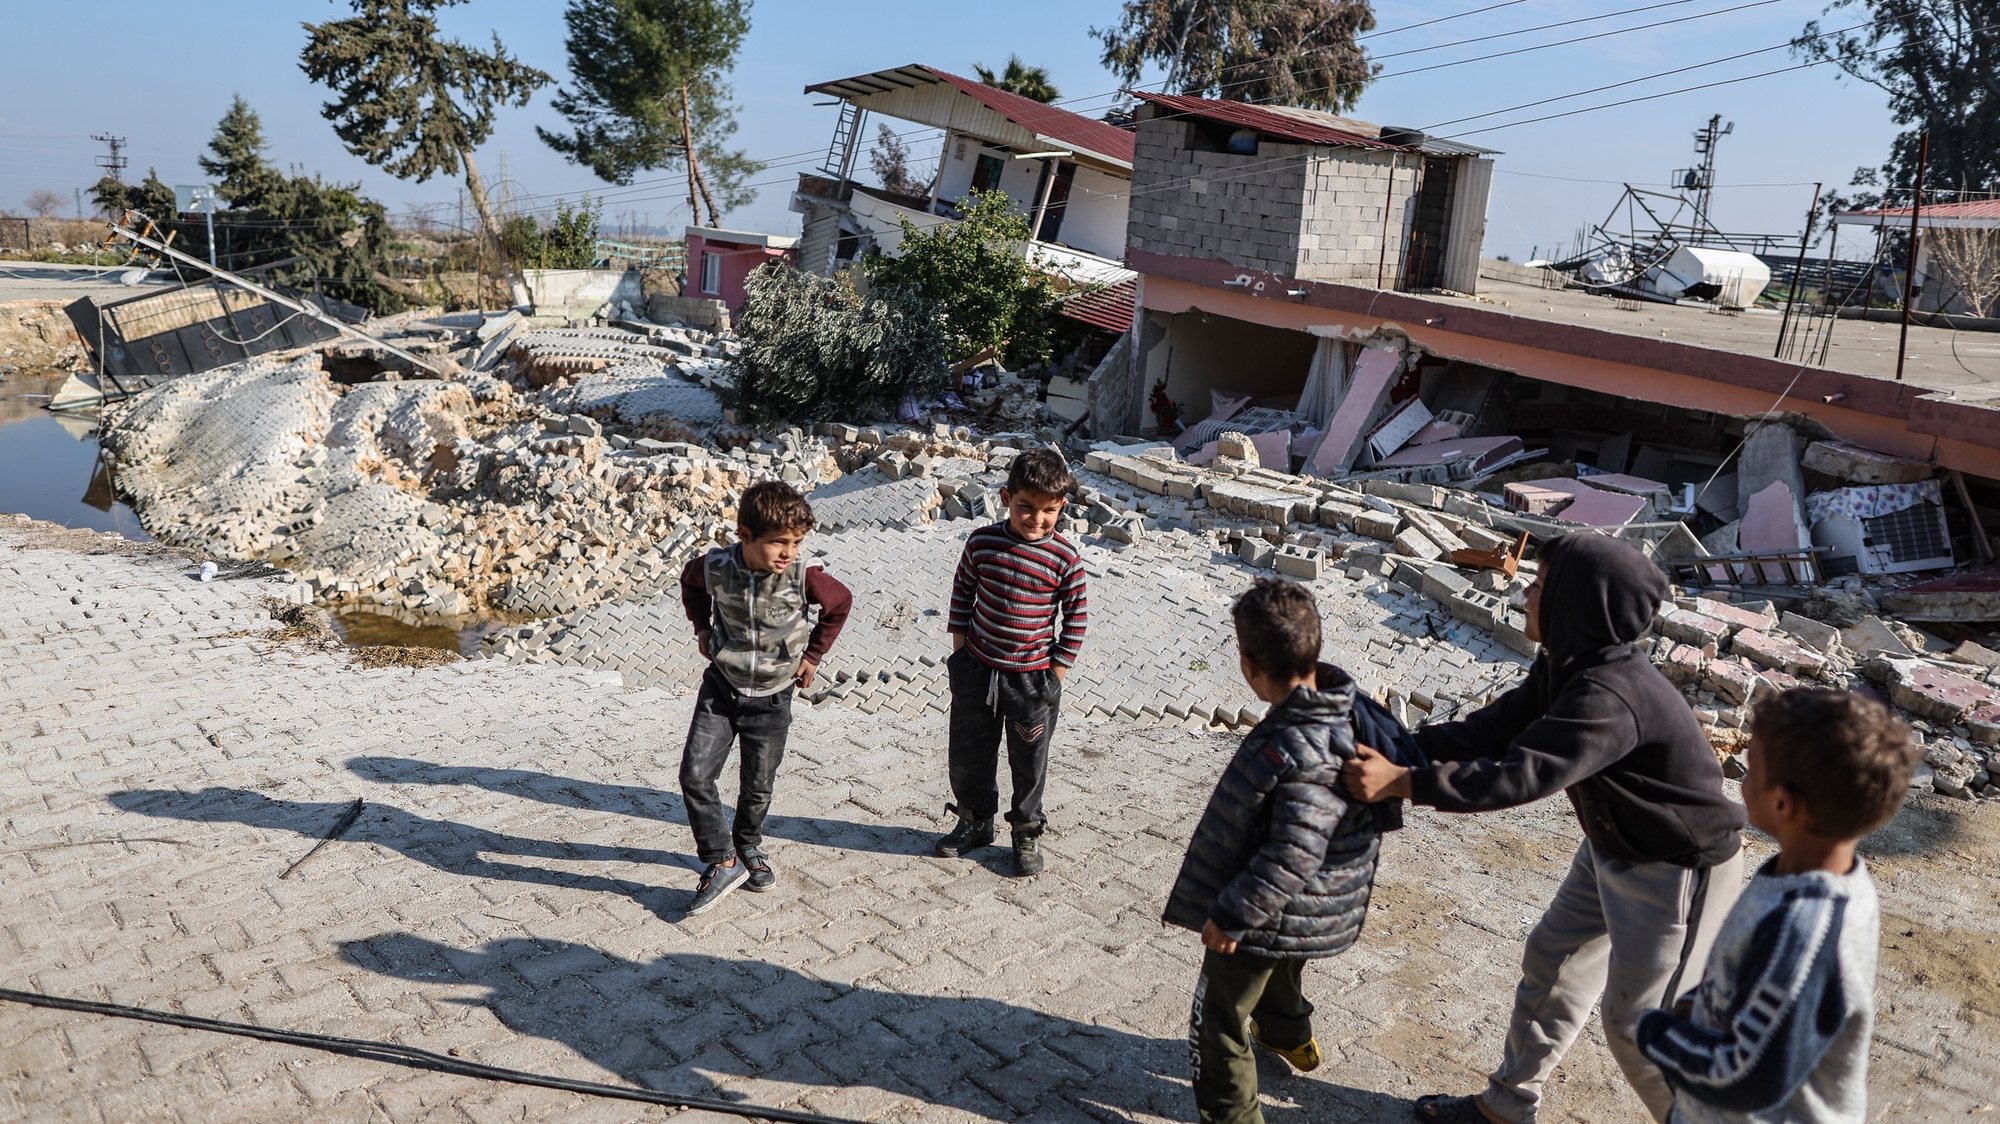 epa10483167 Children play in front of buildings collapsed by a fault line in Demirkopru village, Hatay district, Turkey 22 February 2023. The fault line follows a 6.3-magnitude earthquake, according to U.S. Geological Survey, that hit the Syria-Turkey border on 20 February, weeks after a 7.8-magnitude earthquake hit the region on 06 February, killing more than 46,000 people.  EPA/ERDEM SAHIN